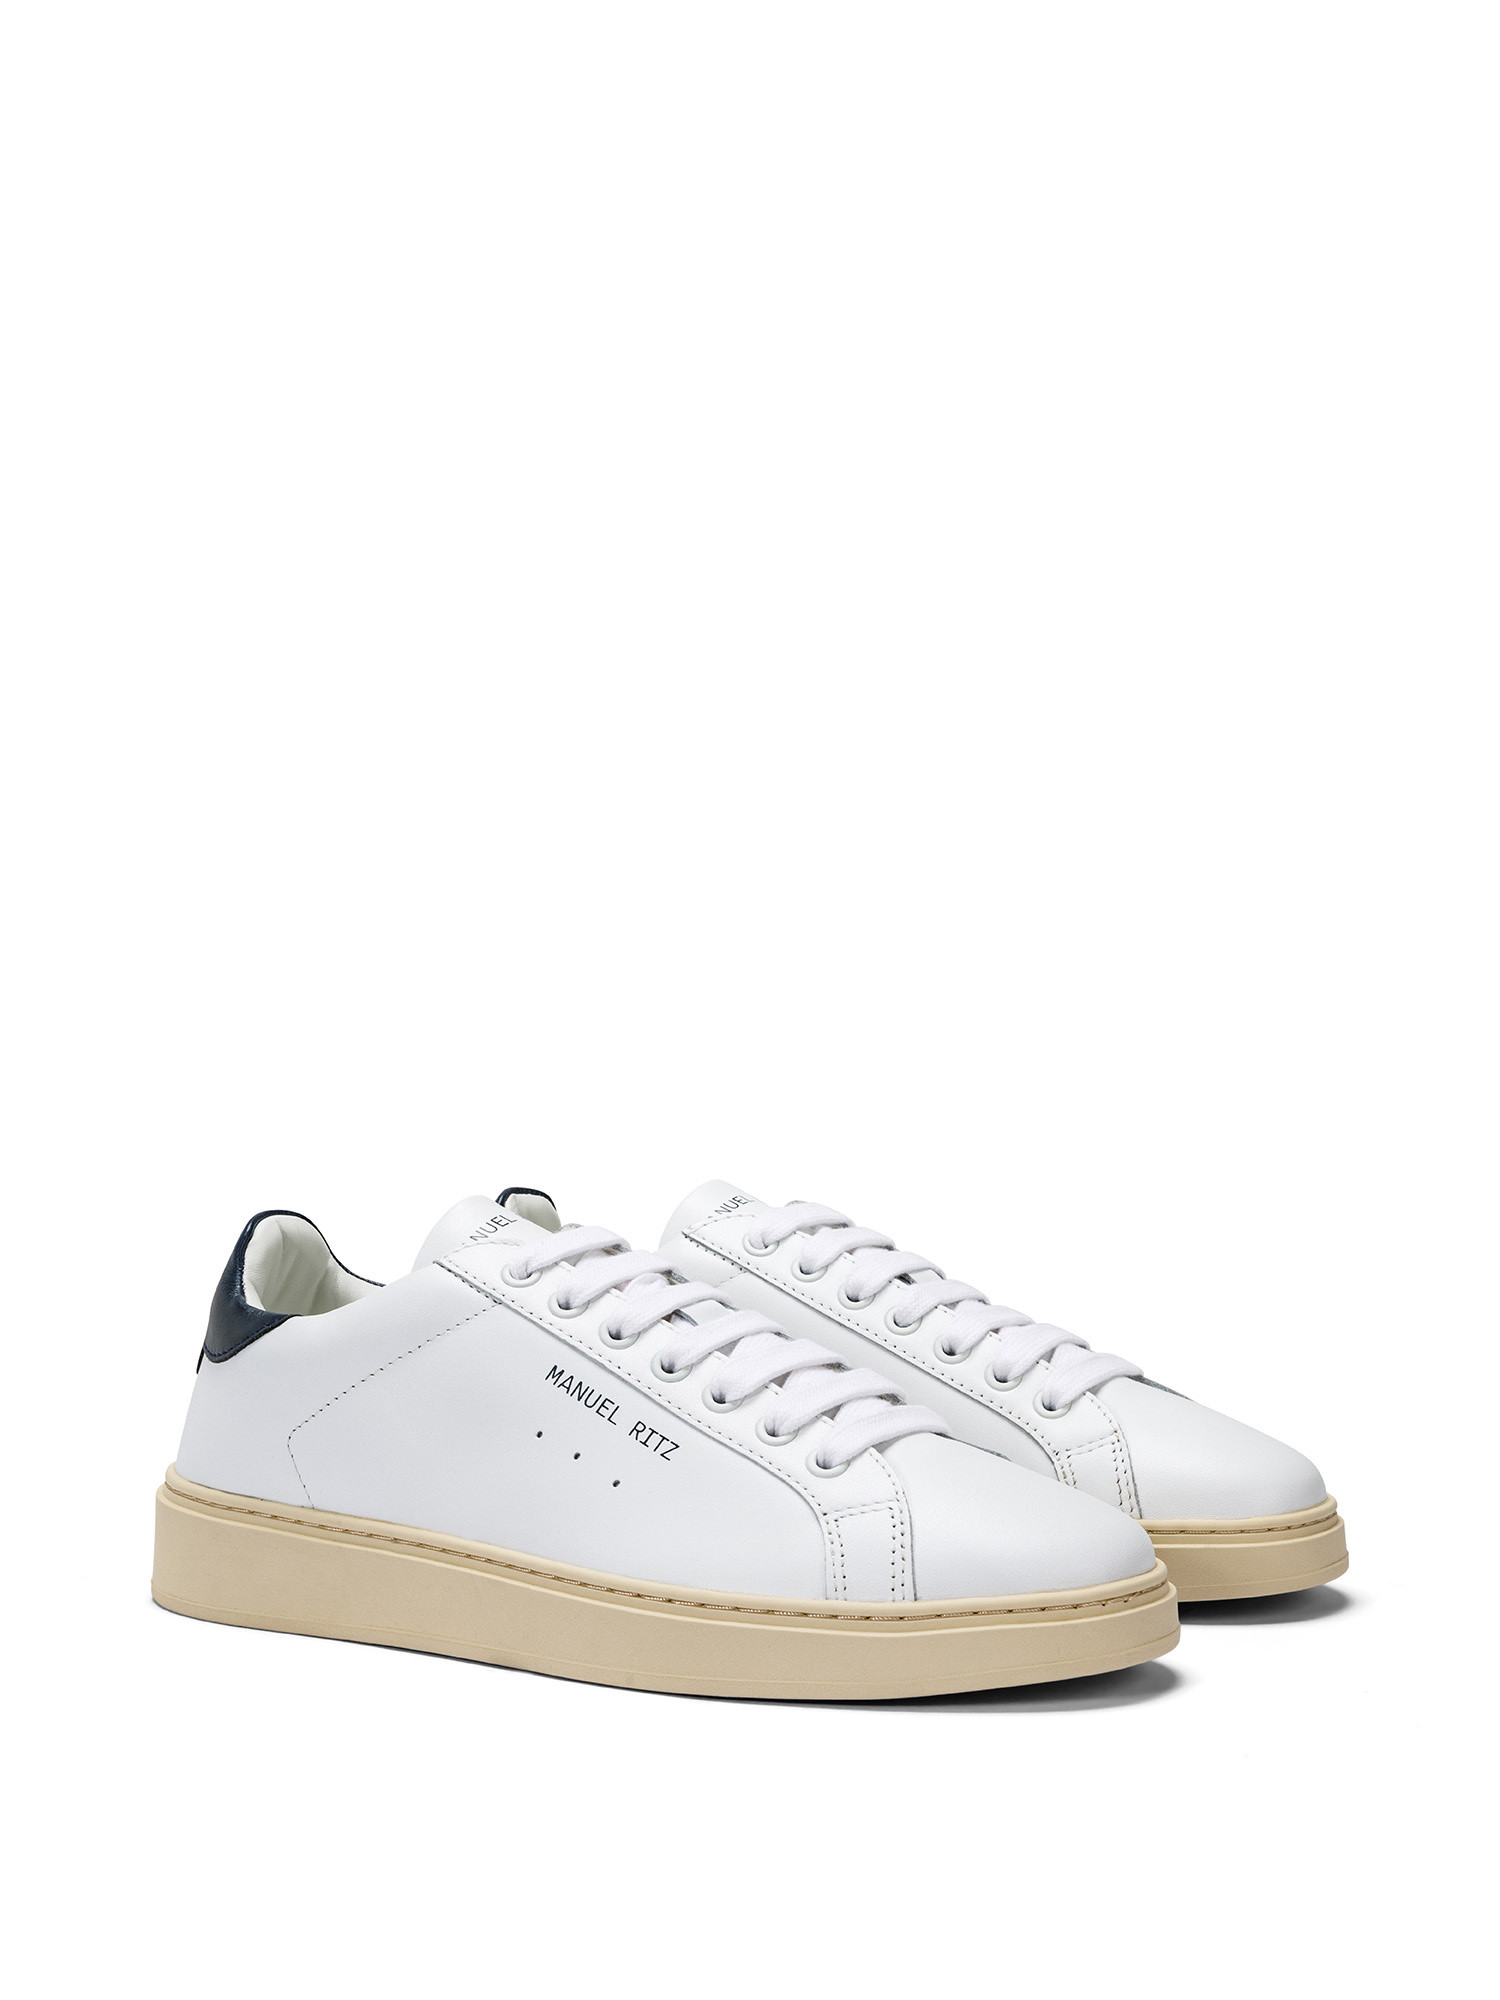 Manuel Ritz - Leather sneakers, White, large image number 1